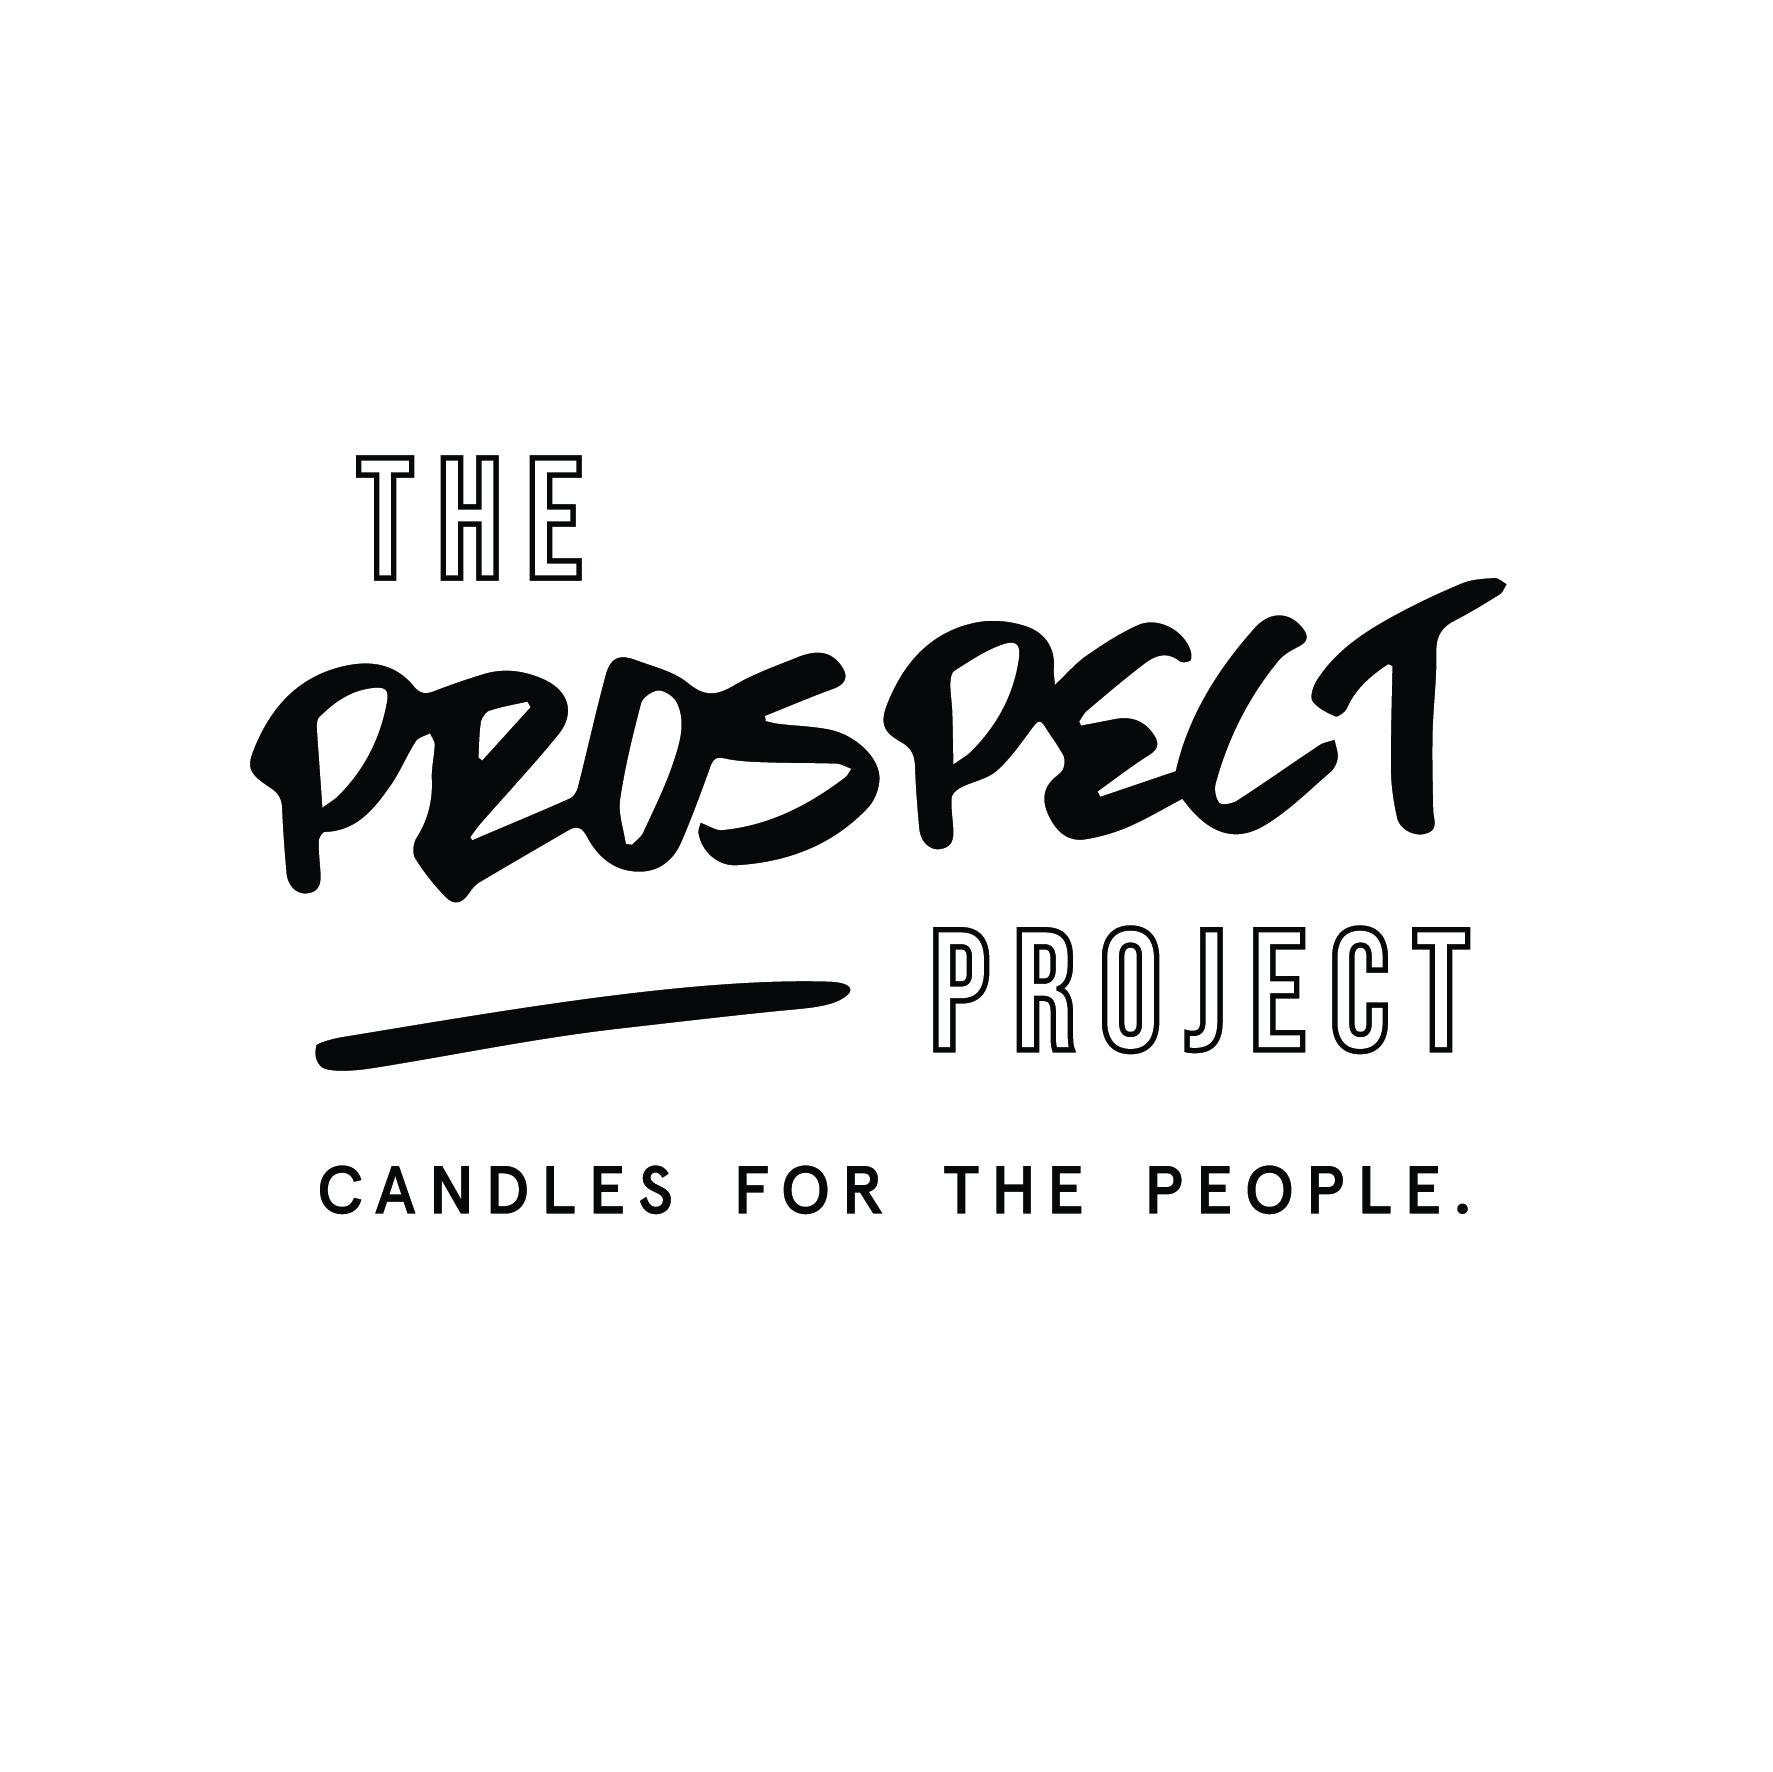 Citrus, Woody, Contemporary / Modern, The Prospect Project Candles